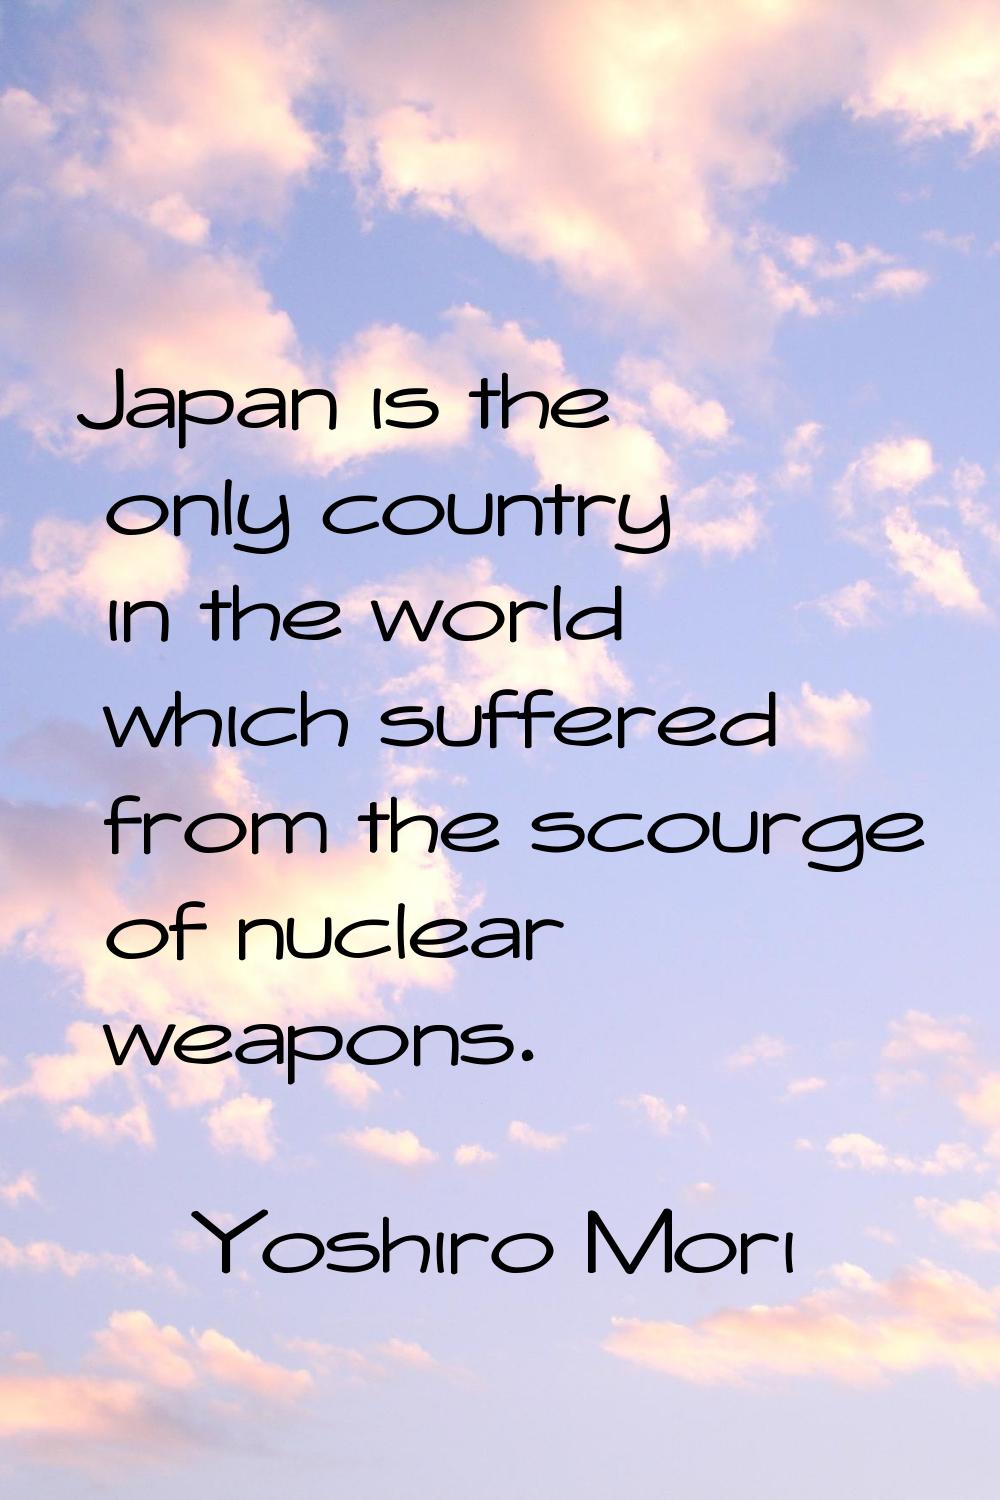 Japan is the only country in the world which suffered from the scourge of nuclear weapons.